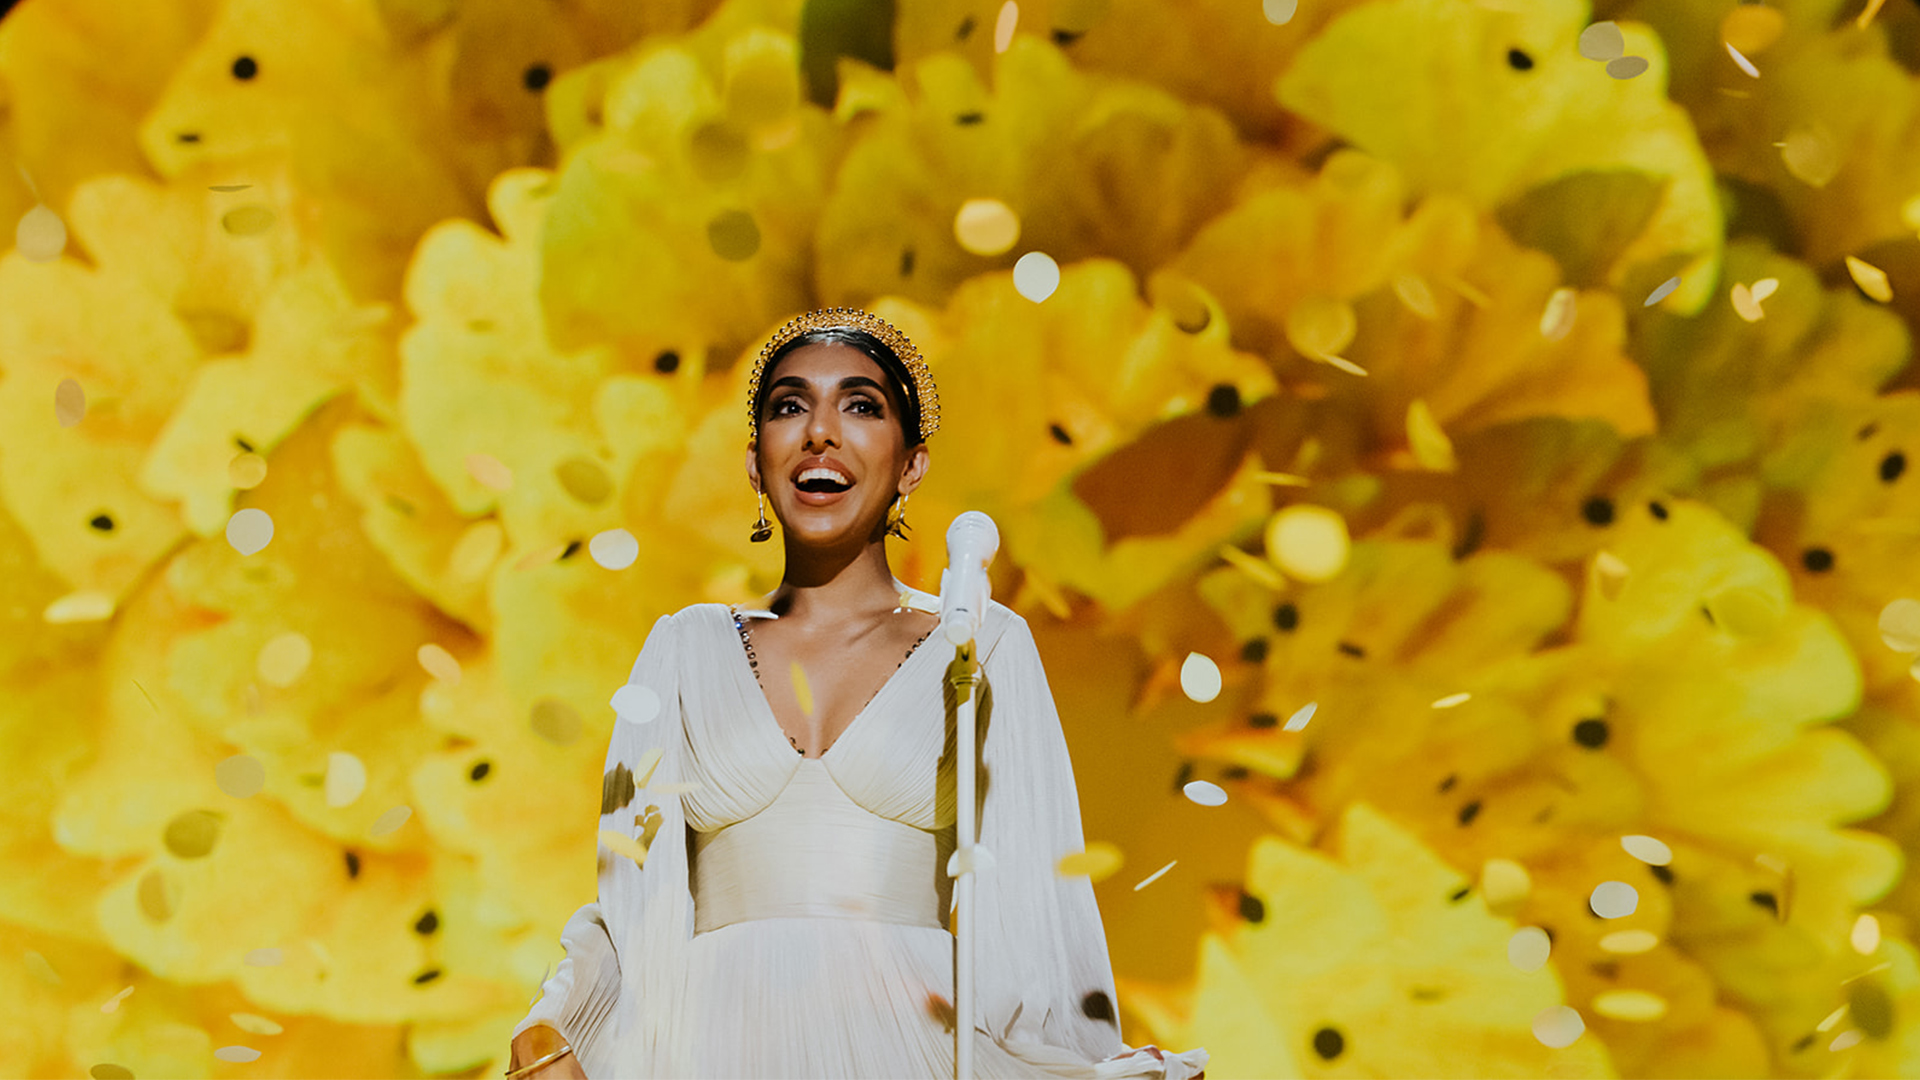 Community and Self-Help in the Poetry of Rupi Kaur